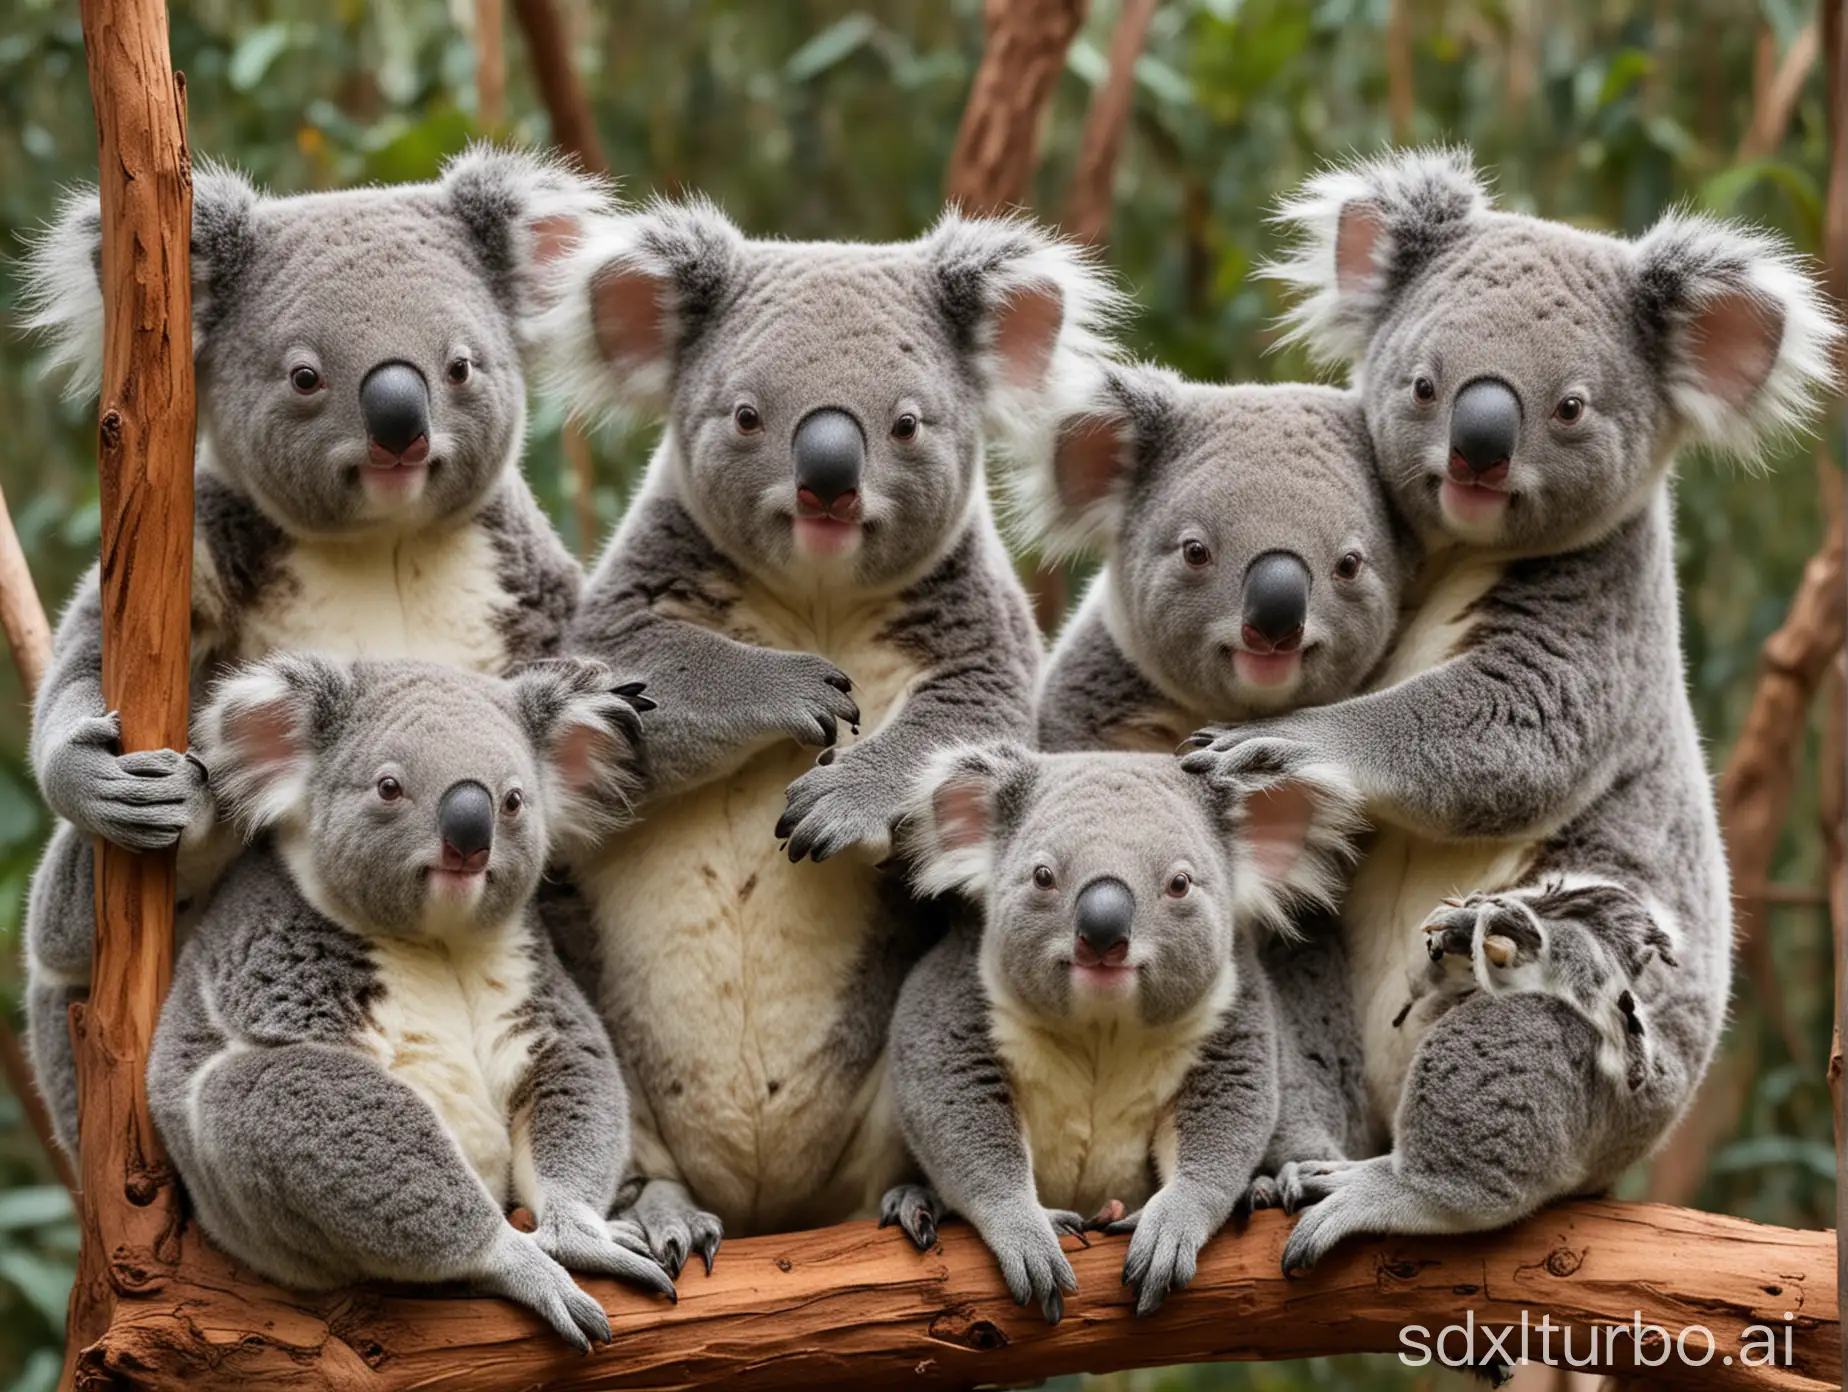 Group-of-Playful-Koala-Bears-Hanging-Out-in-a-Eucalyptus-Forest